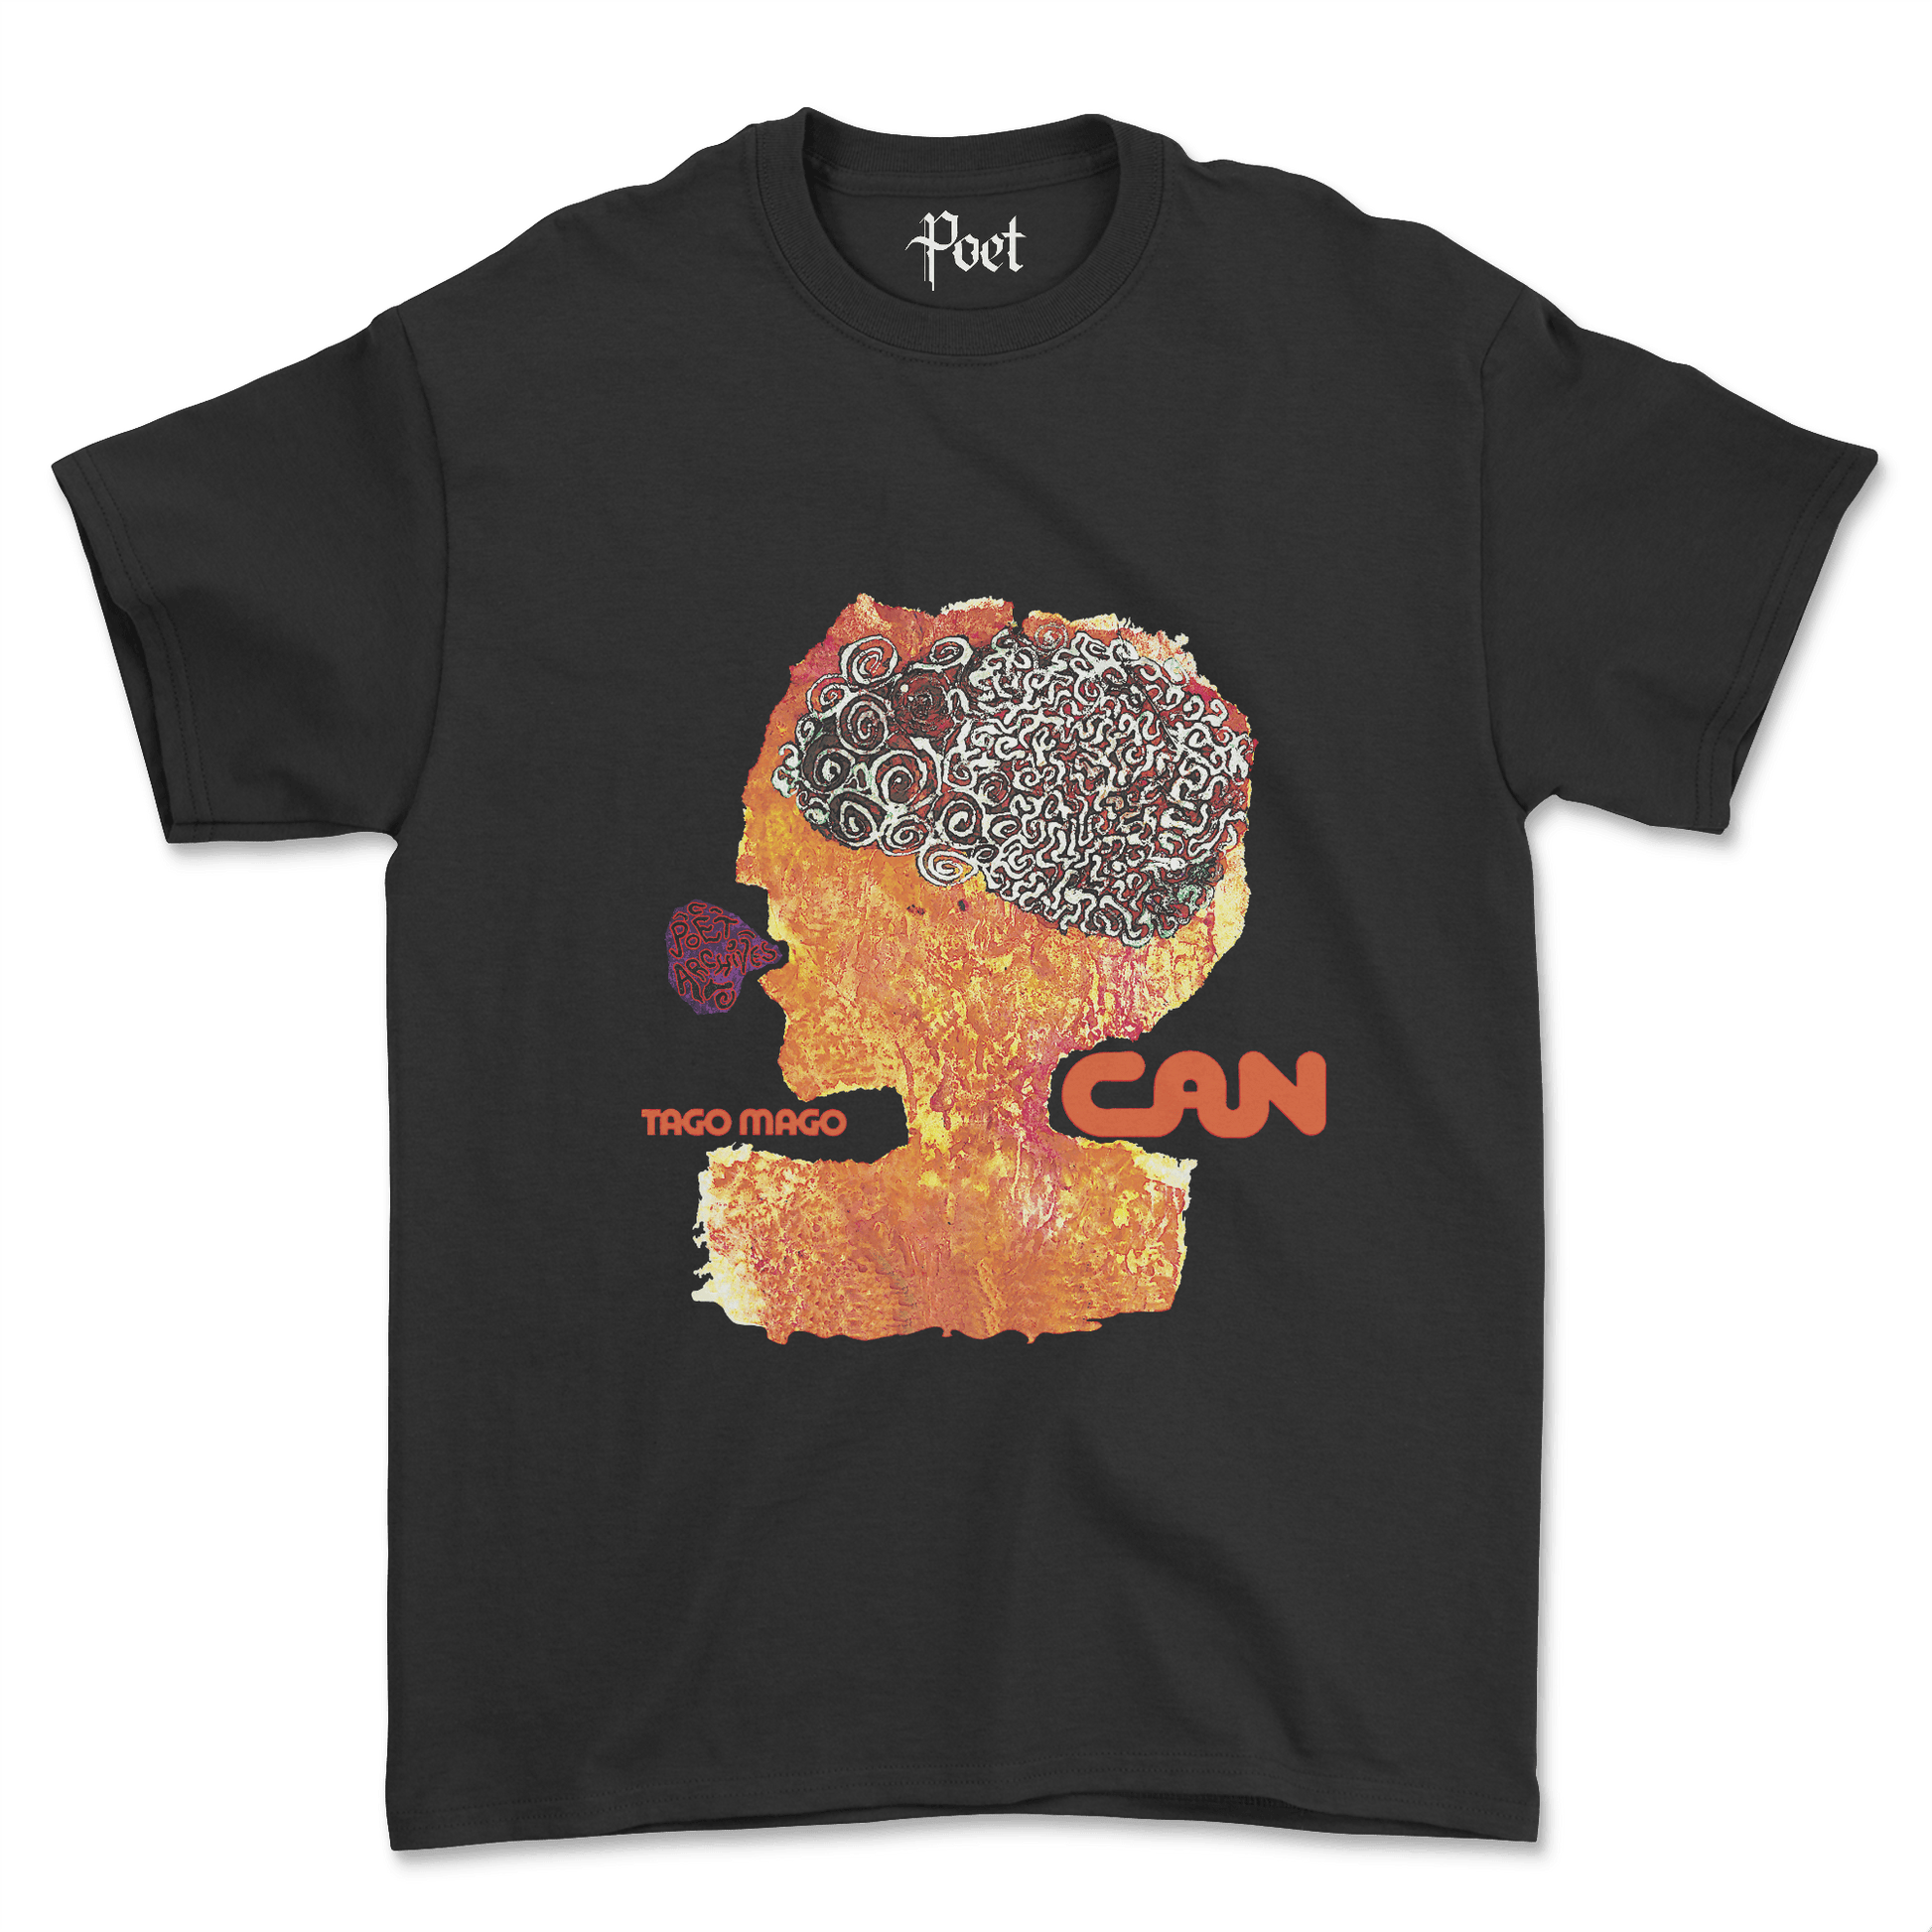 Can Tago Mago T-Shirt - Poet Archives